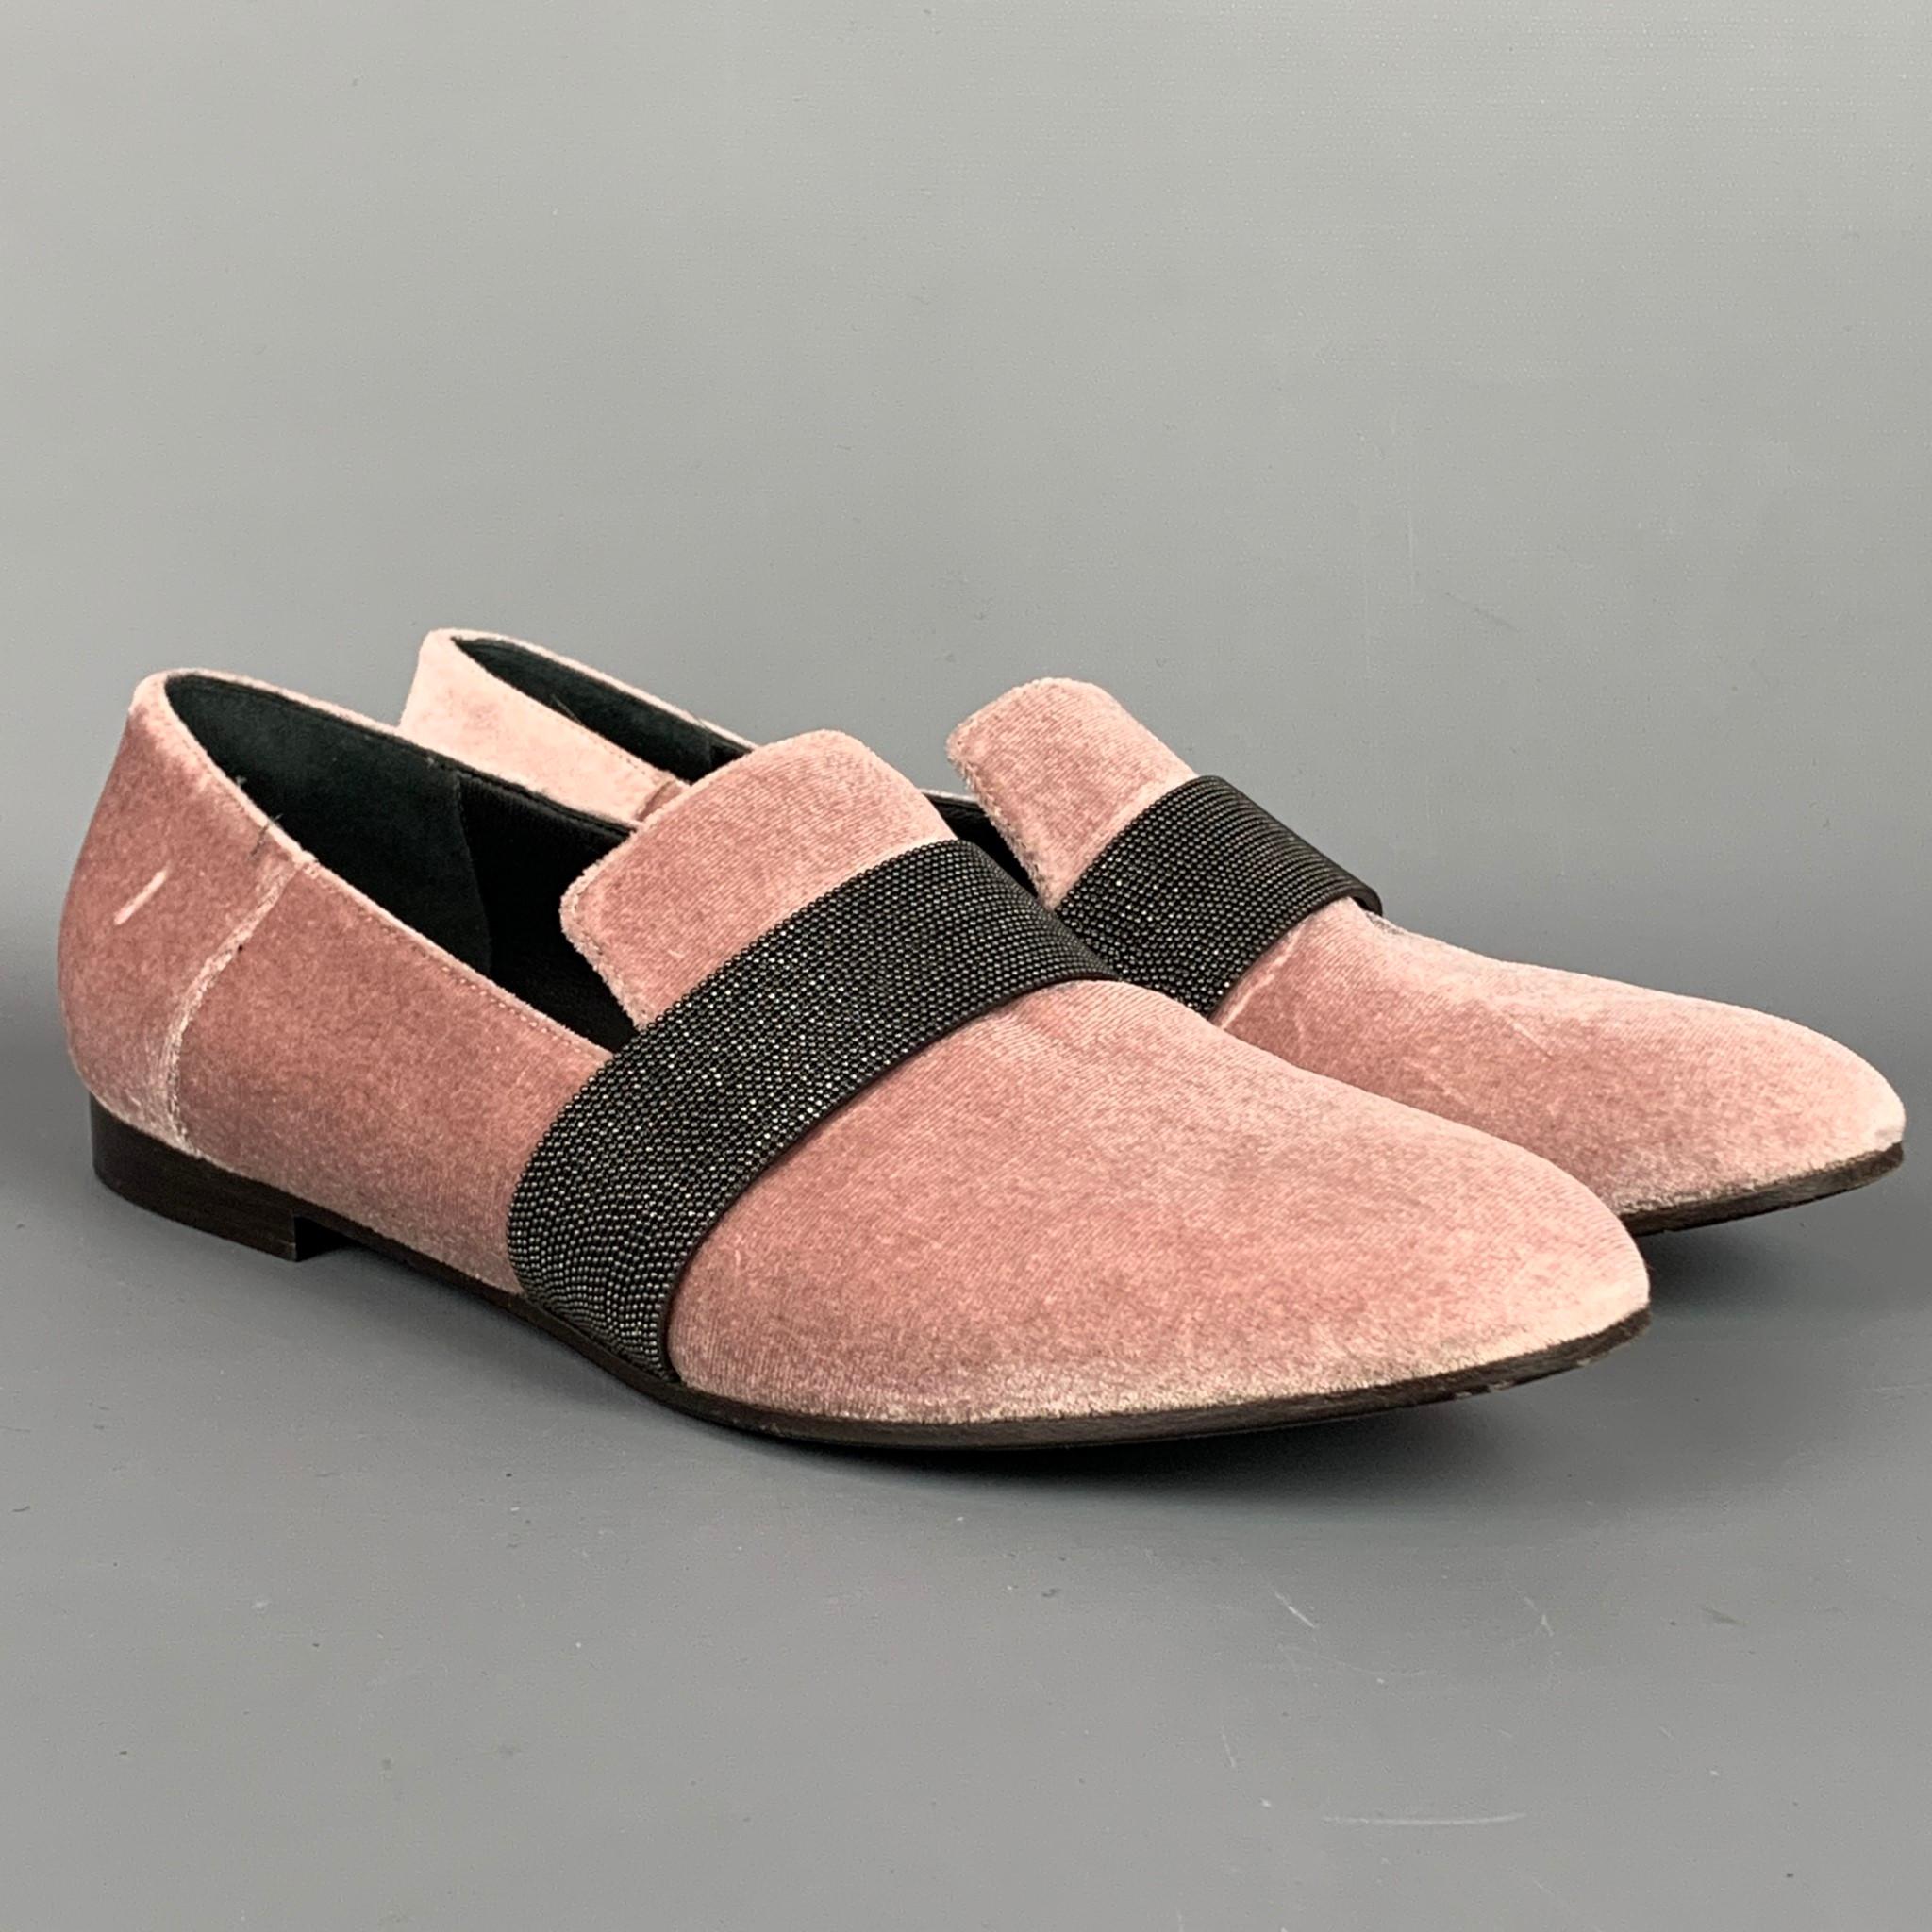 BRUNELLO CUCINELLI flats comes in a pink gunmetal velvet with a monilli detail featuring a slip on style and a wooden sole. Made in Italy. 

Very Good Pre-Owned Condition.
Marked: IT 38
Original Retail Price: $850.00

Outsole: 10 in. x 3 in. 